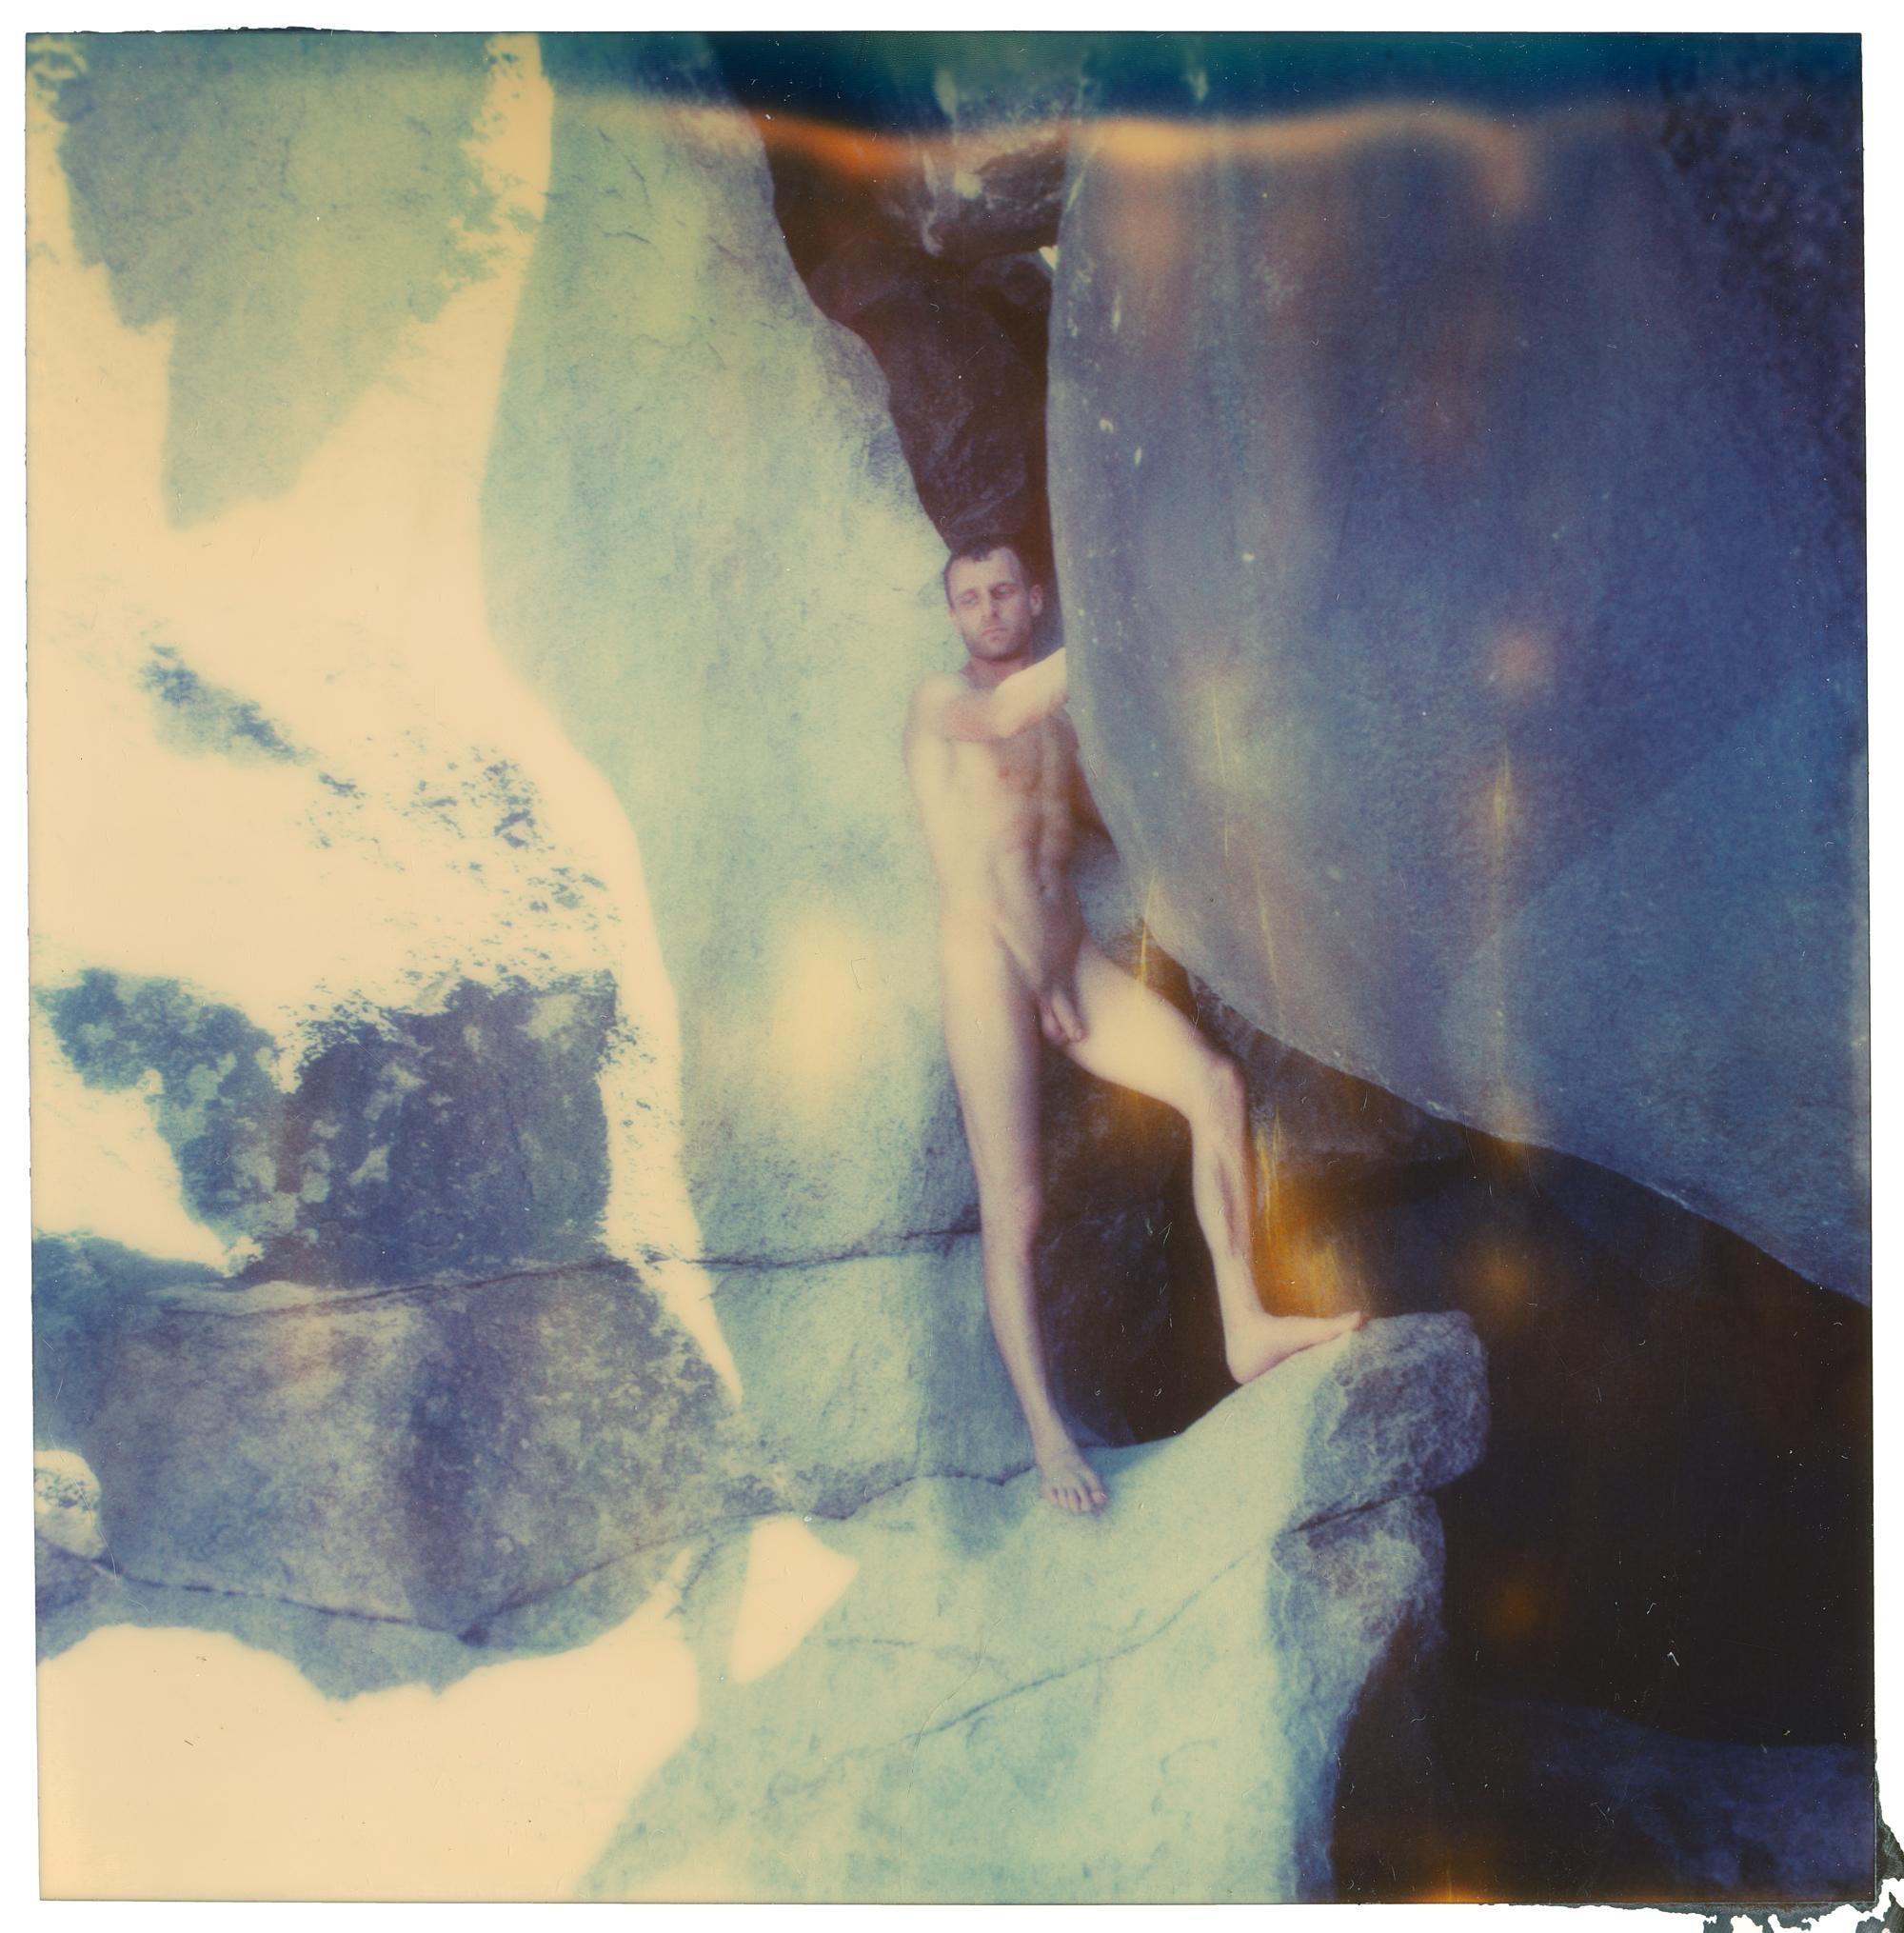 Stefanie Schneider Color Photograph - The Cave 02 - Planet of the Apes 11 - 21st Century, Polaroid, Abstract